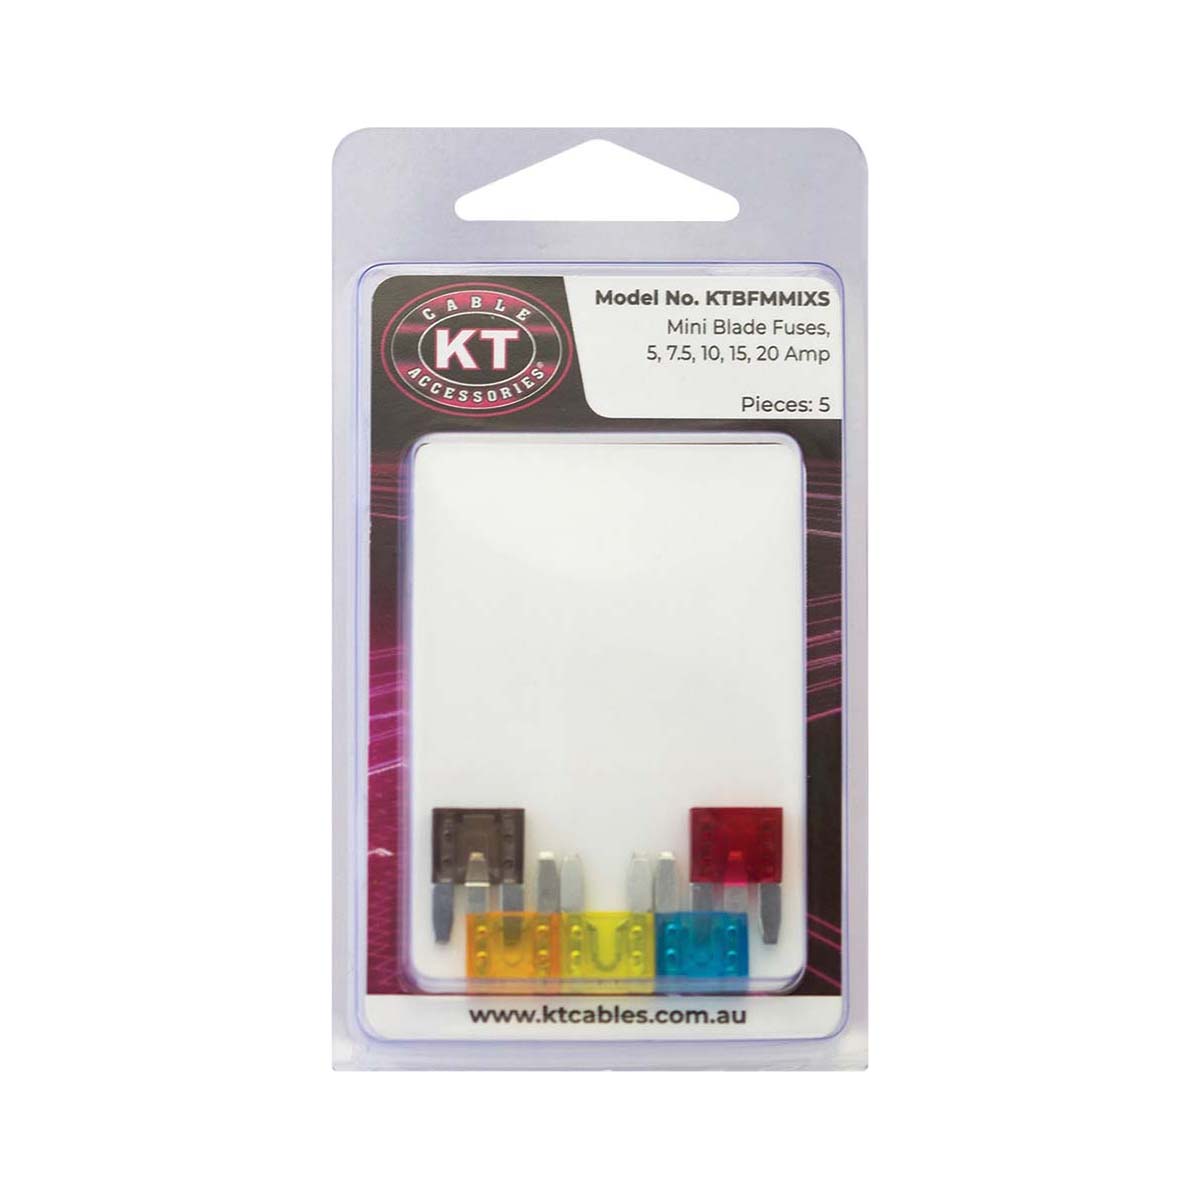 KT Cables Assorted Mini Blade Fuse 5 Pack